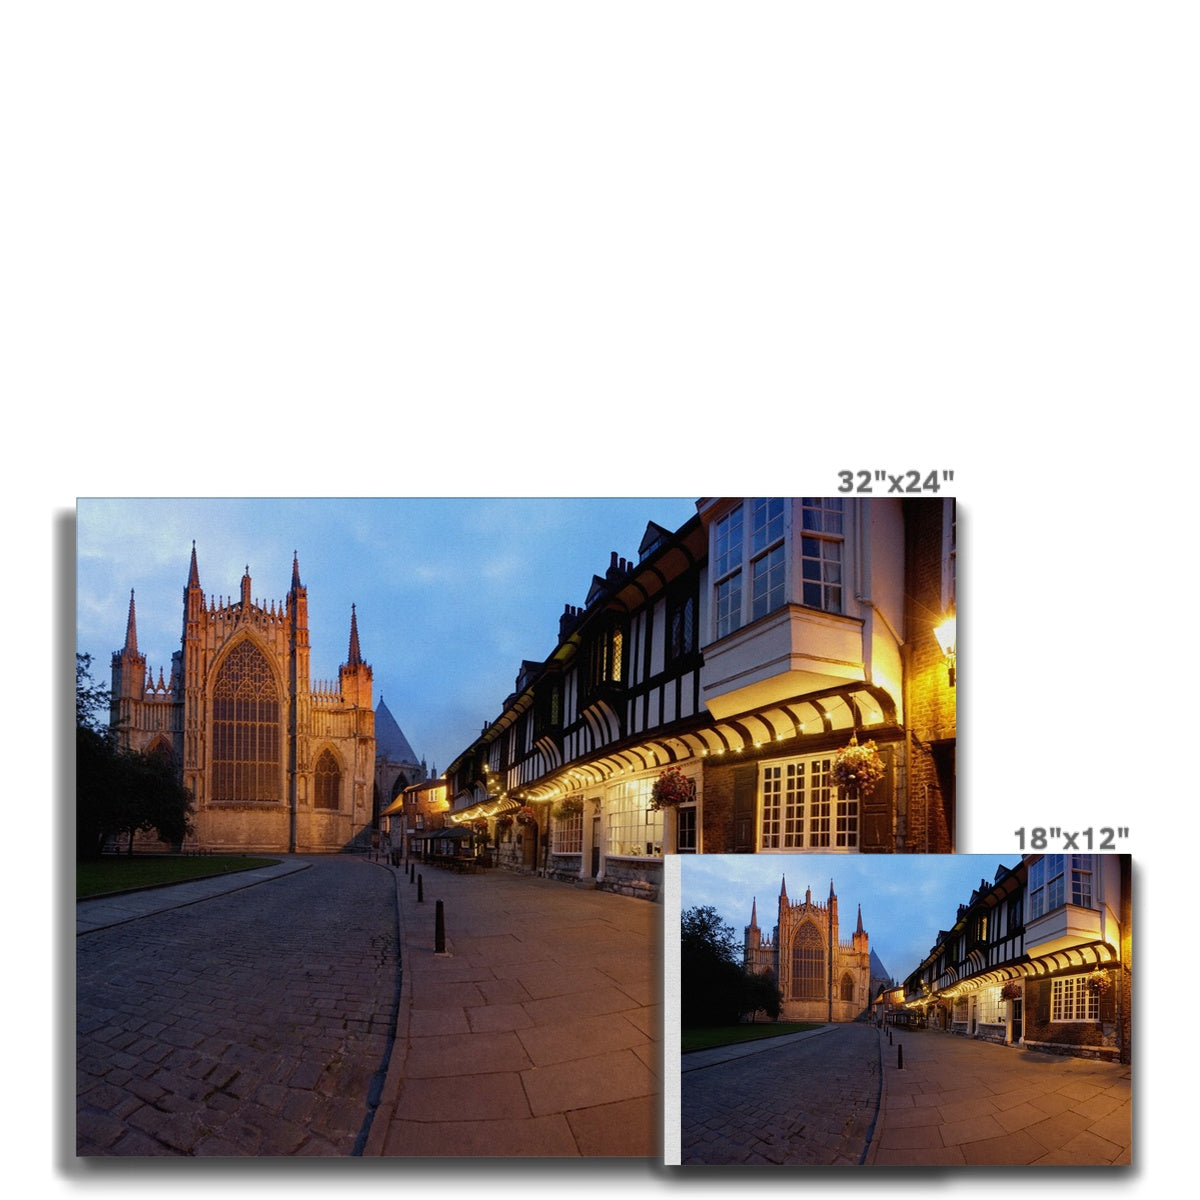 York Minster and St Williams College at dusk. York UK Canvas